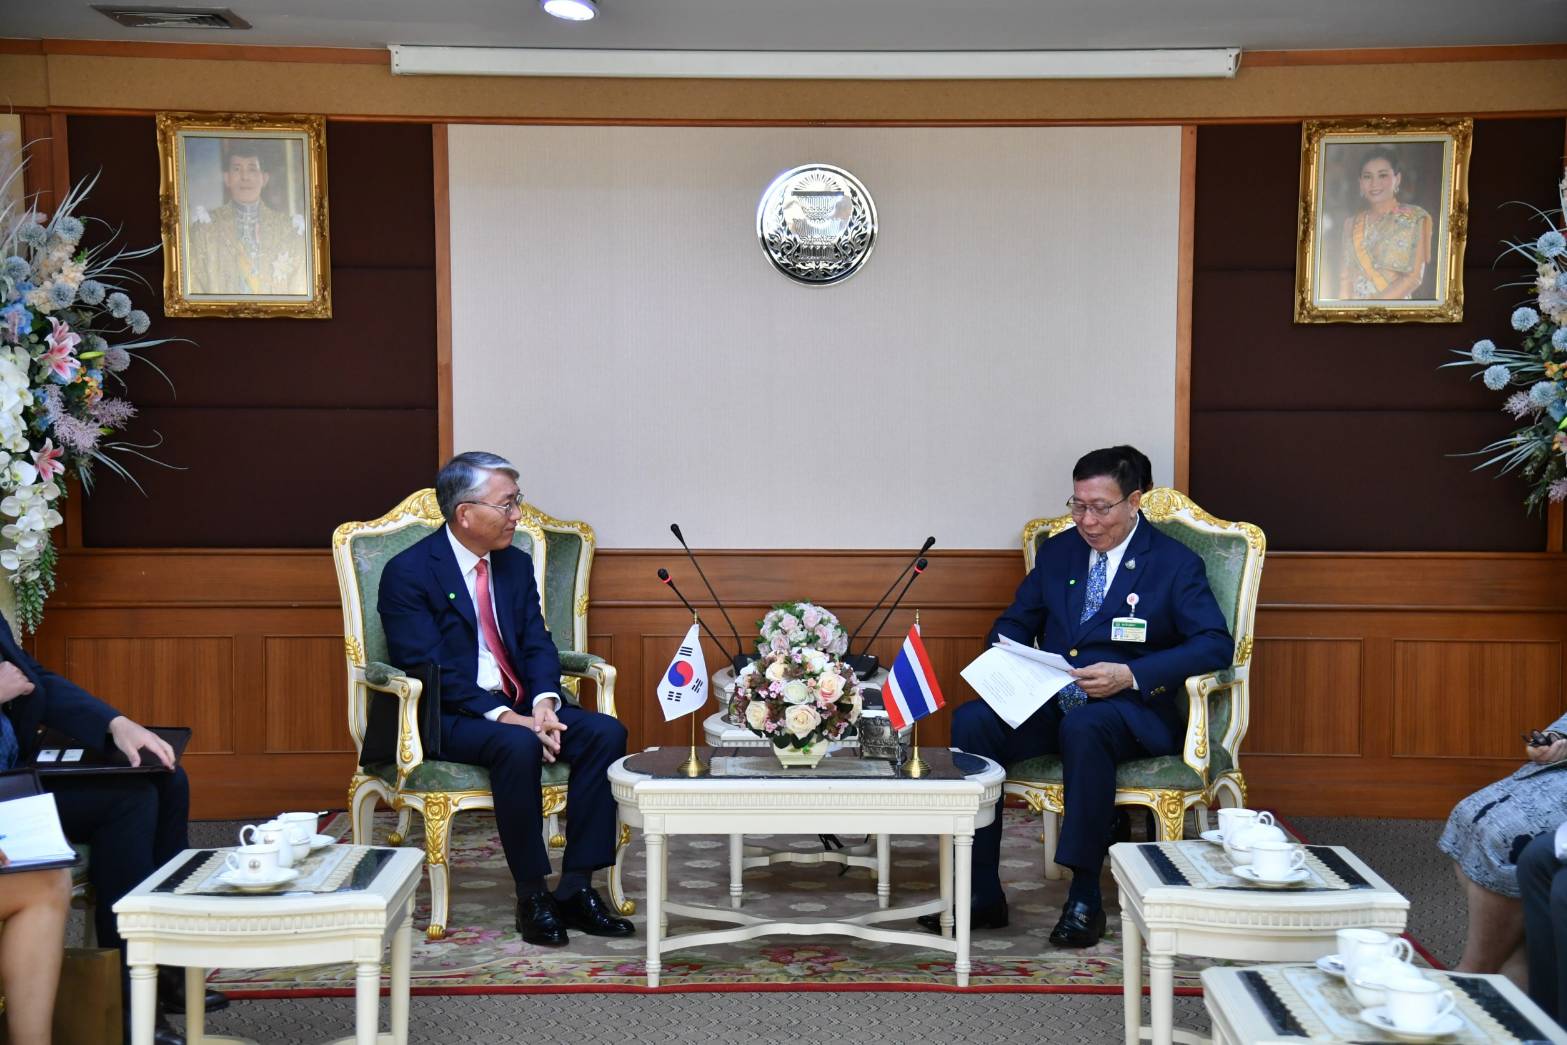 H.E. Mr. Lee Wook-heon, Ambassador of the Republic of Korea to Thailand Paid a Courtesy Call on the President of the Senate (18 March 2020)